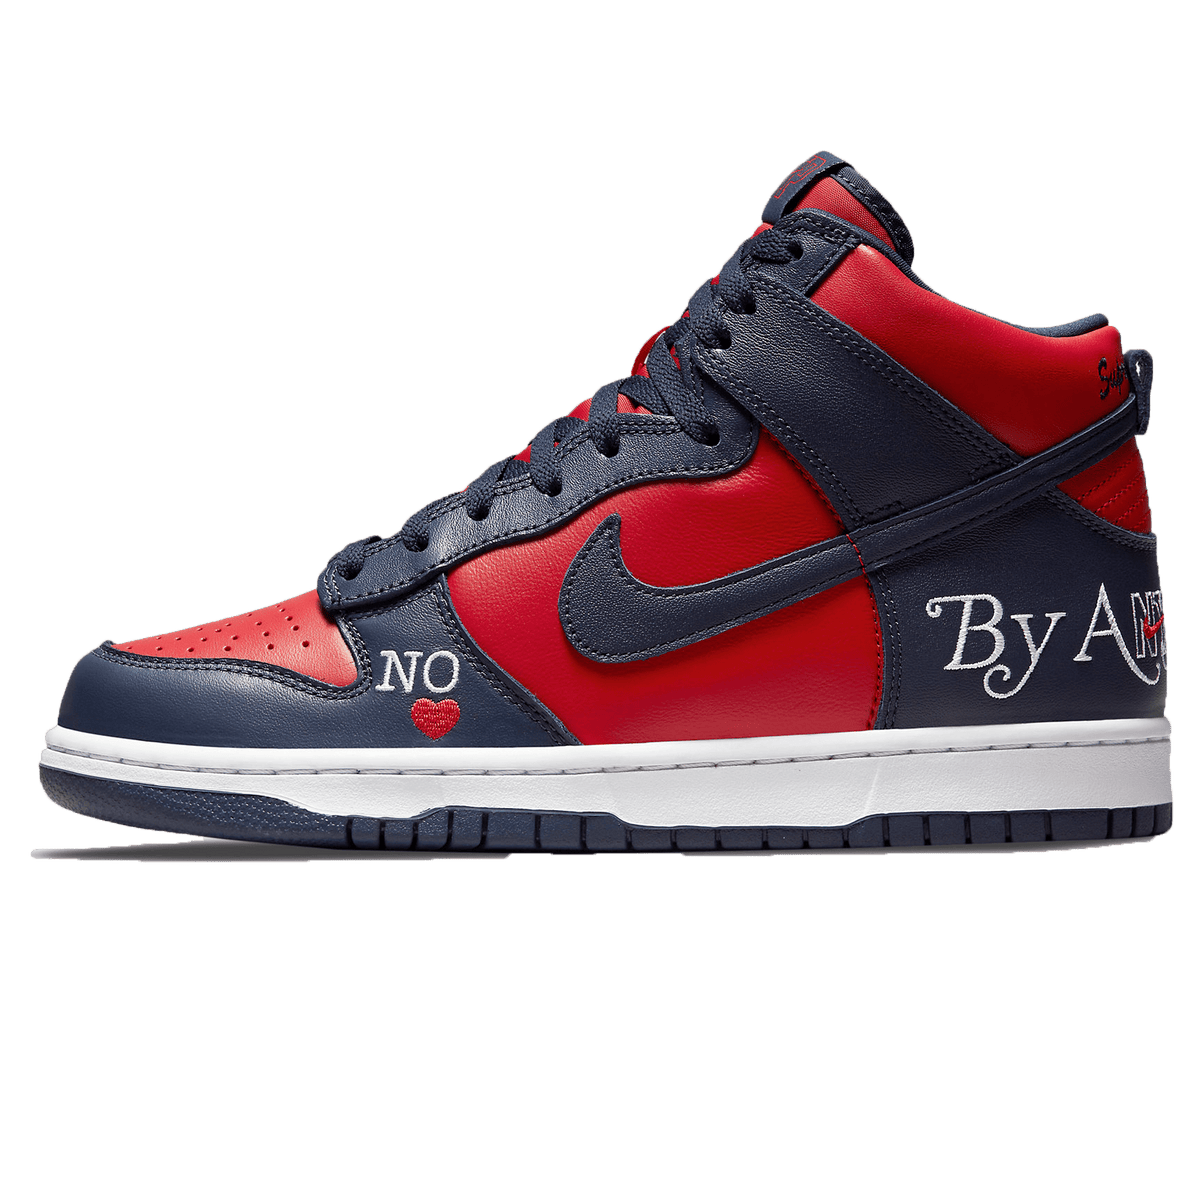 Supreme x Nike Dunk High SB 'By Any Means - Red Navy' - CerbeShops